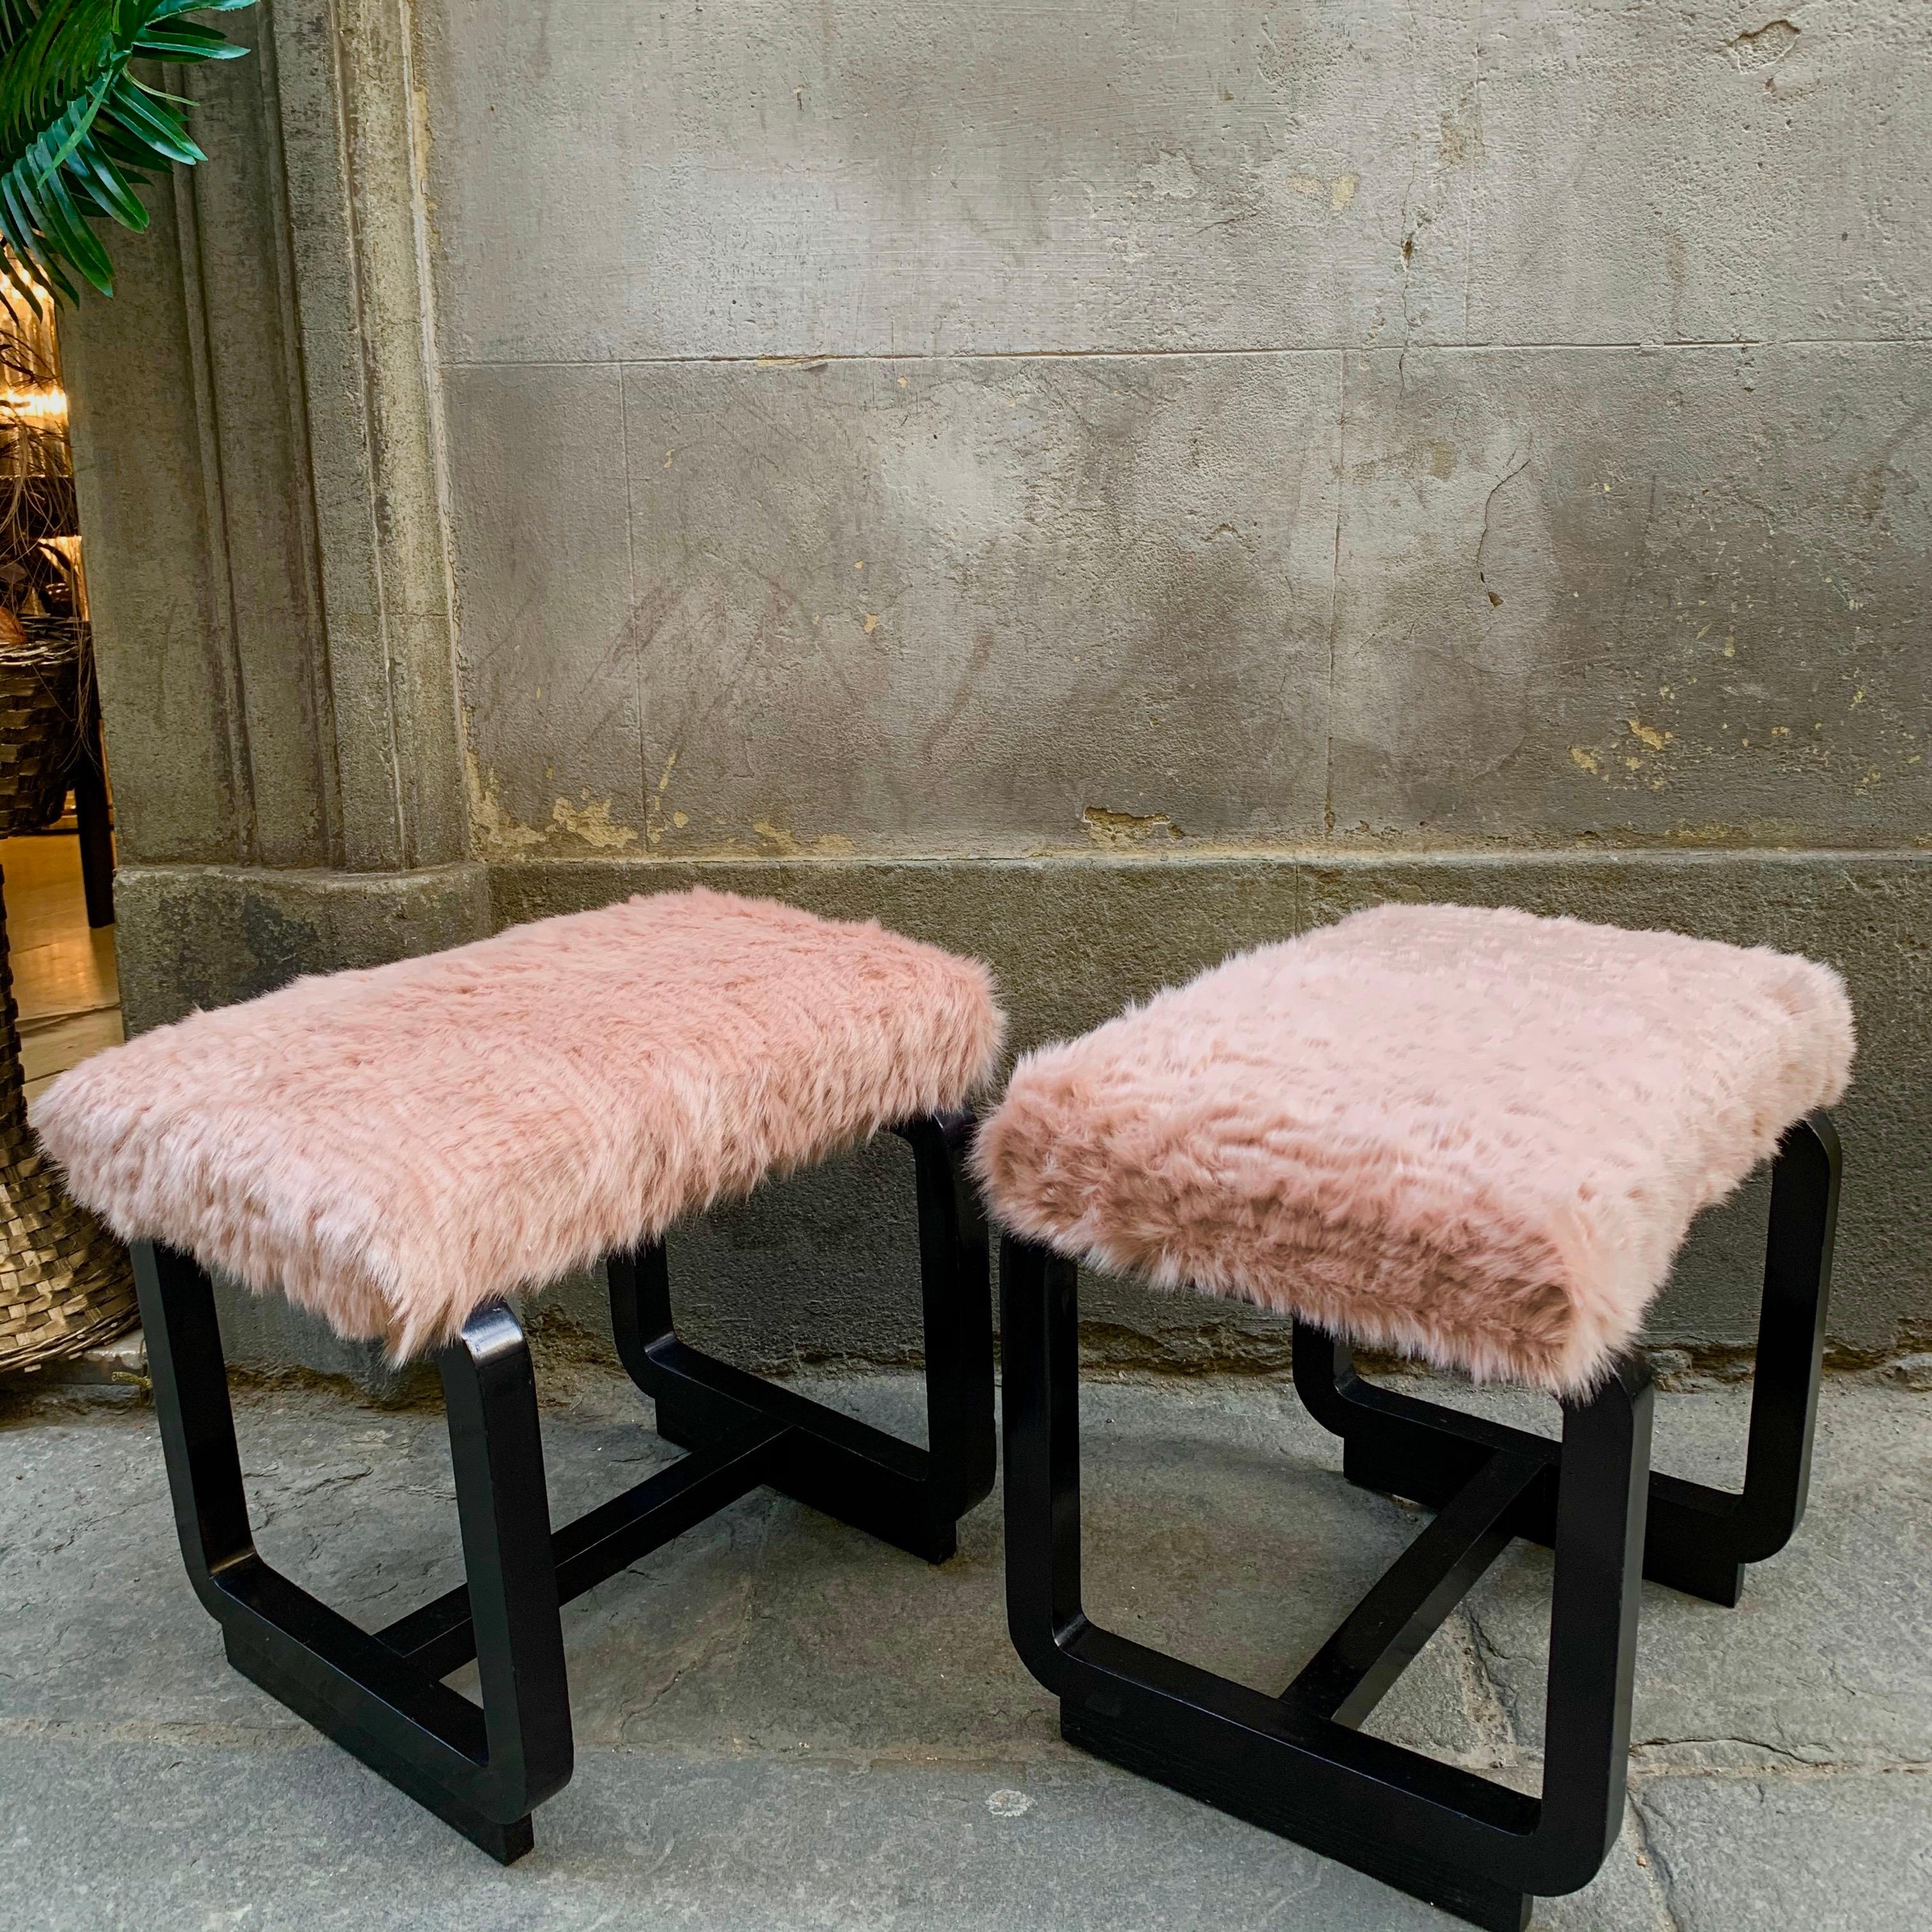 Faux Fur Pair of Deco Benches in Black Lacquered Wood and Pale Pink Eco Fur Seats, 1930